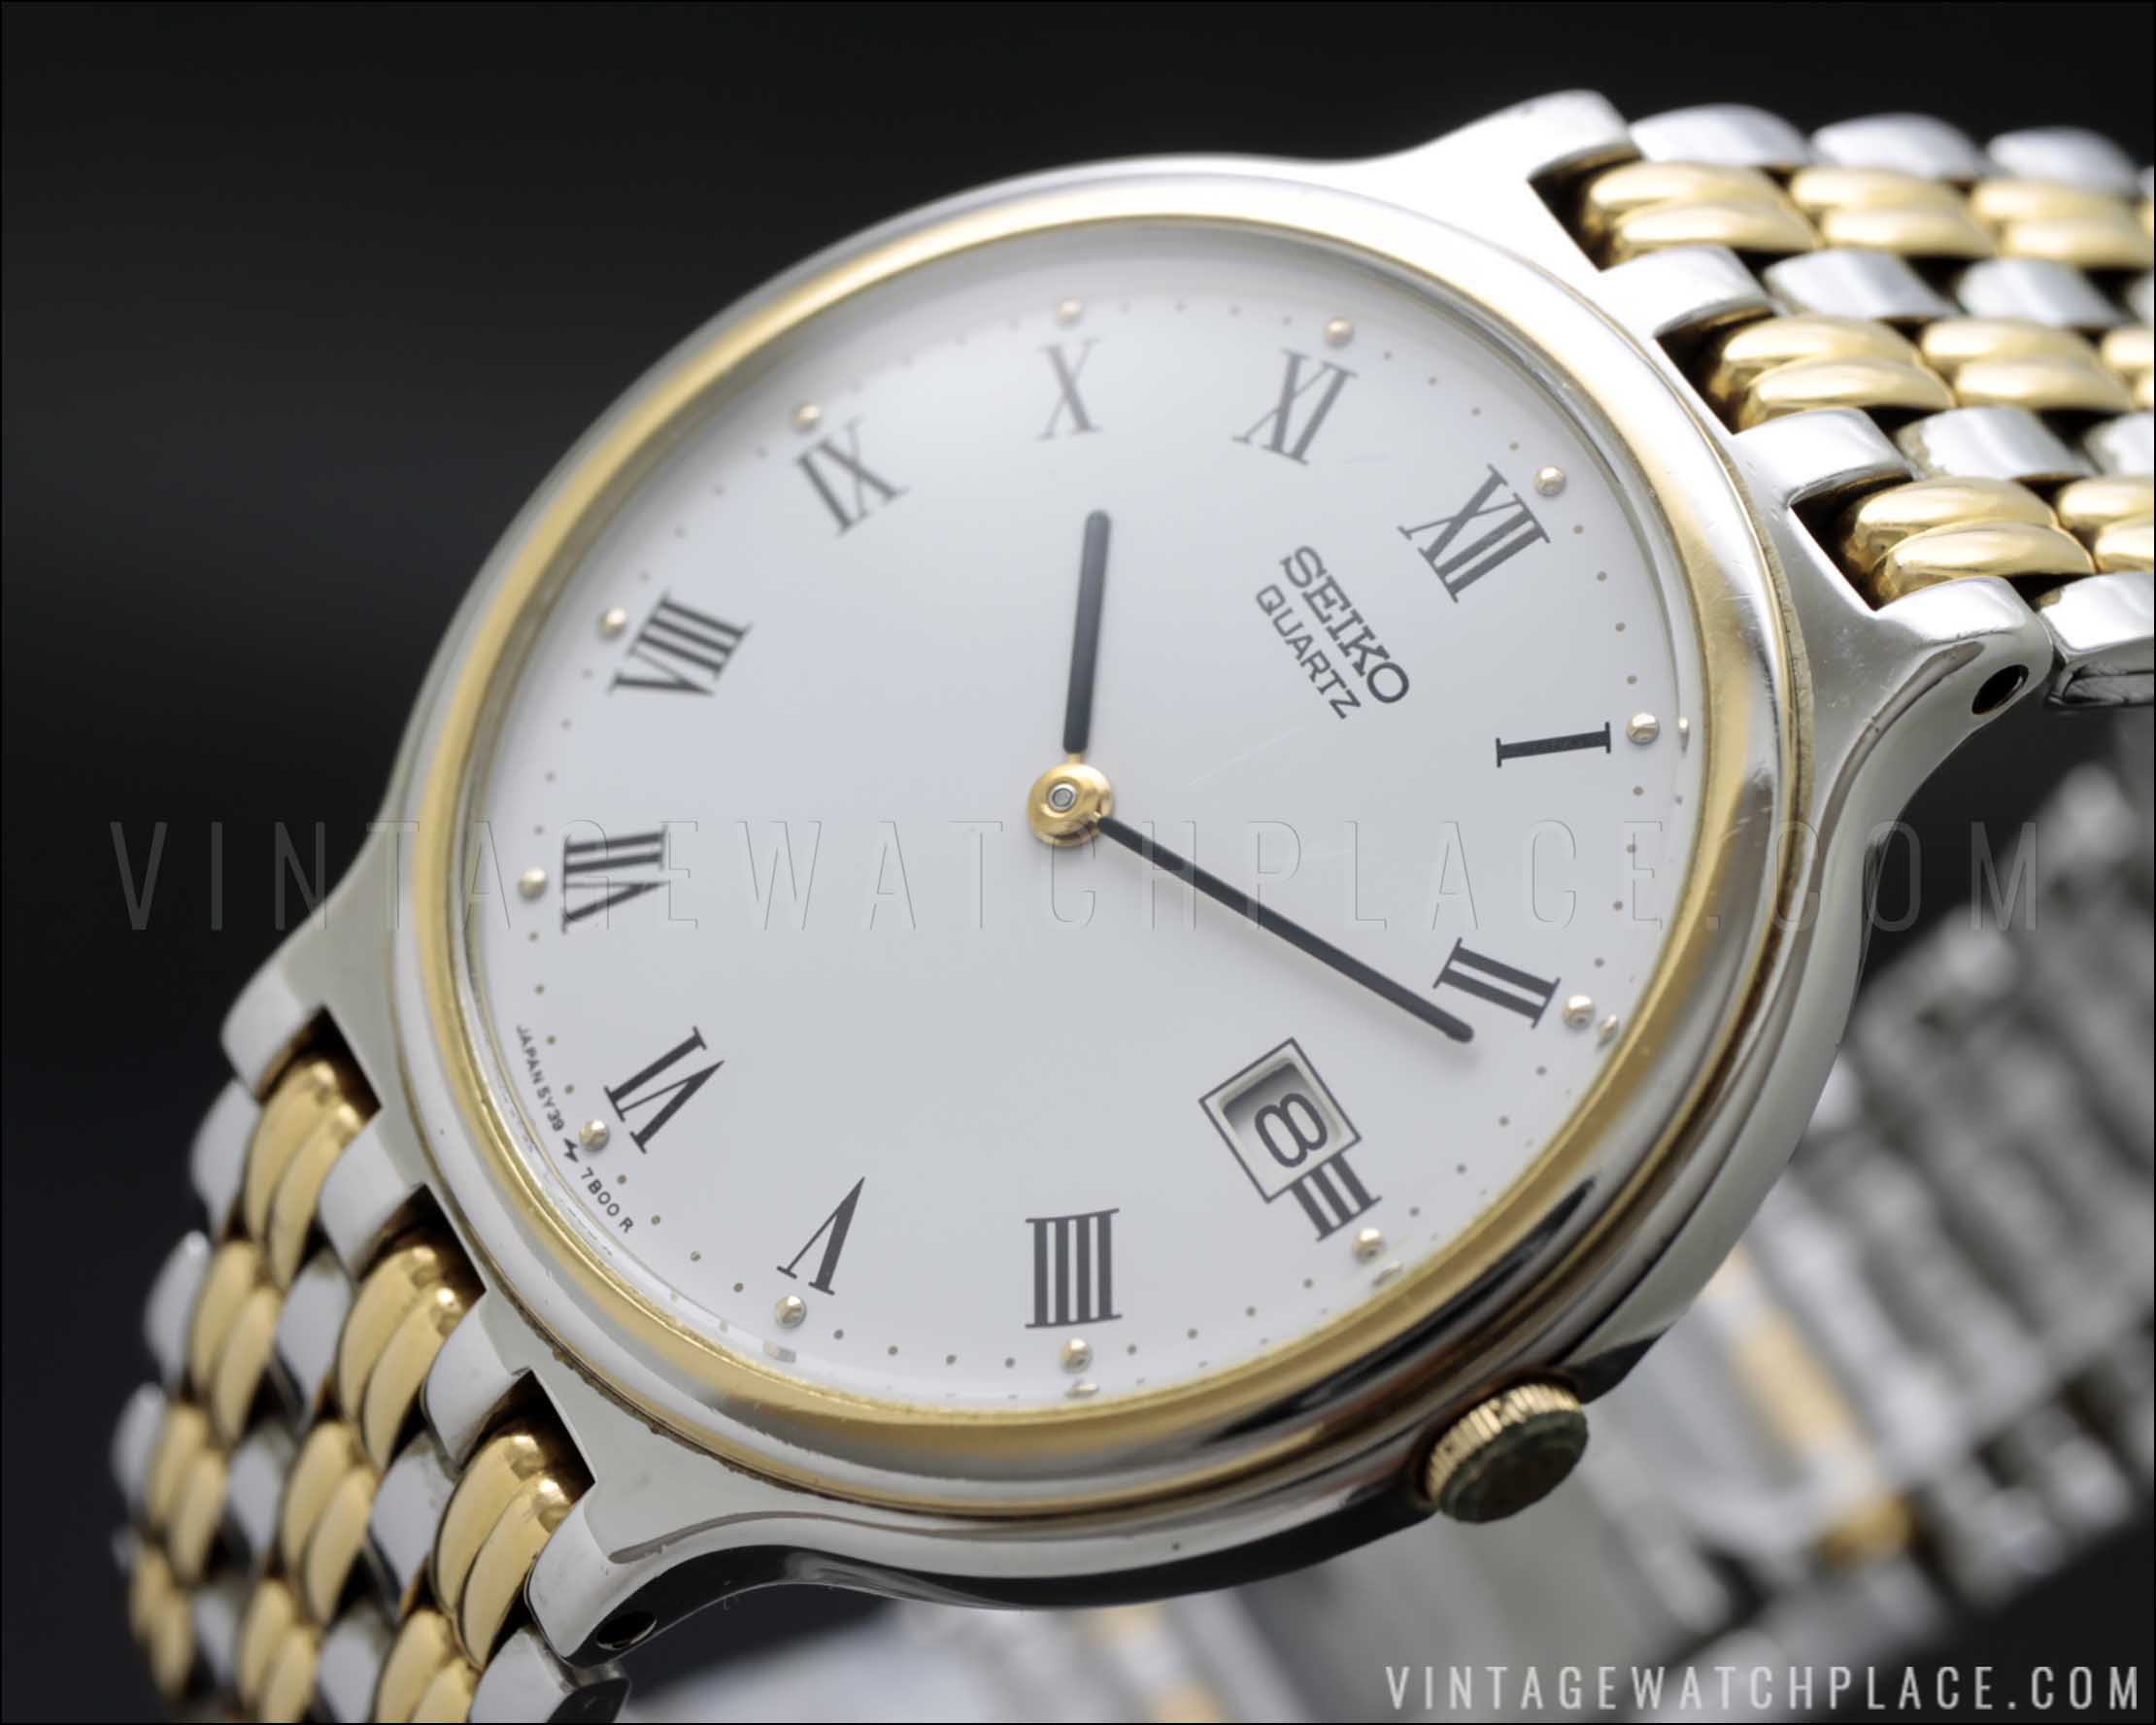 Used dress Seiko Quartz vintage watch, very flat, 5Y39-7A70, stainless  steel and golden, very dainty!